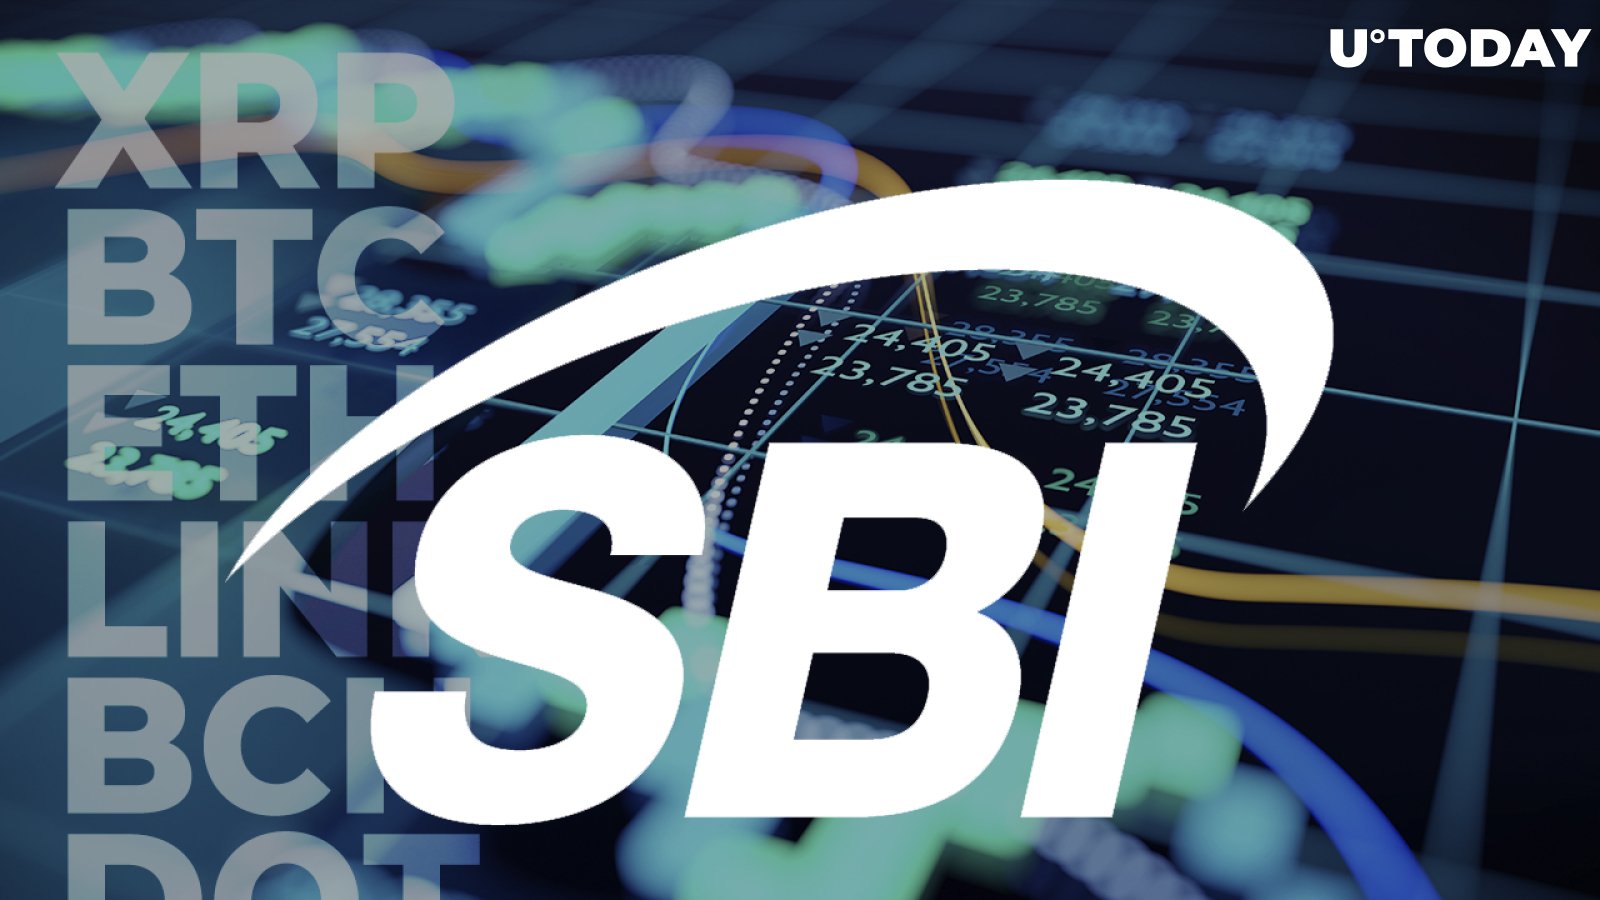 XRP, BTC, ETH, LINK, BCH, DOT Now Can Be Bought by Ordinary Investors via New SBI Crypto Fund